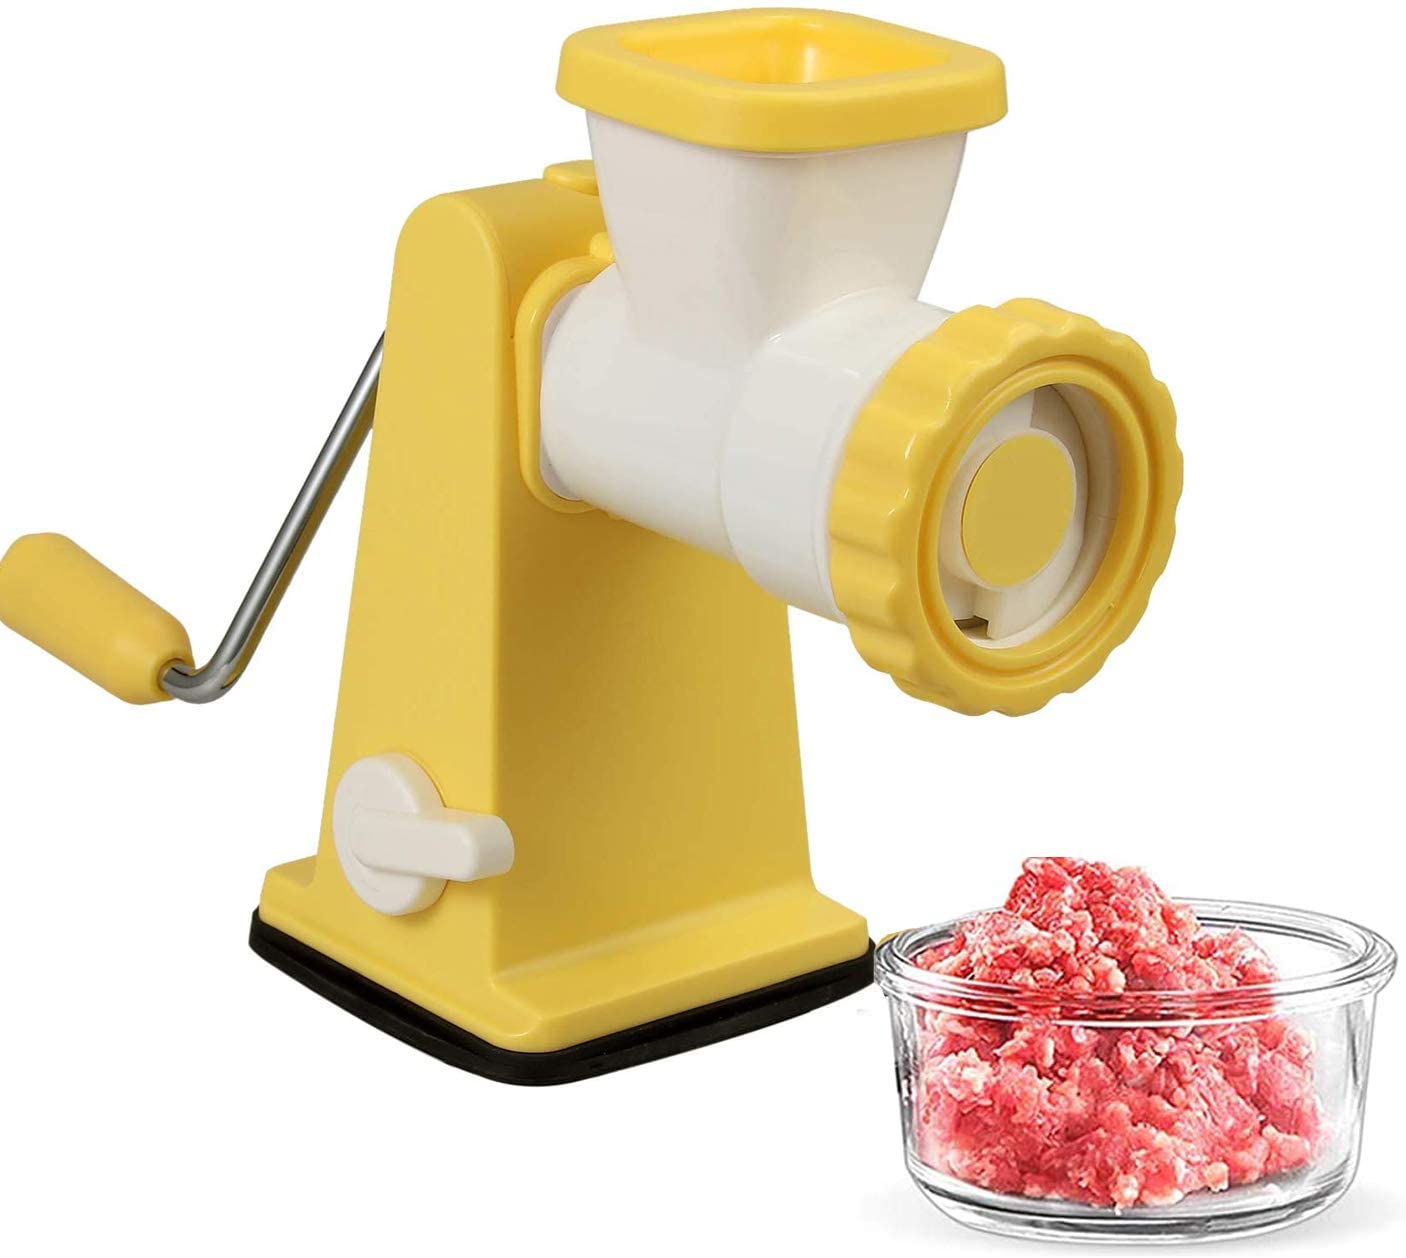 FUGEN Meat Mincer Sausage Filler Food Mill with Strong Suction Base and Food-Grade Stainless Steel Blades